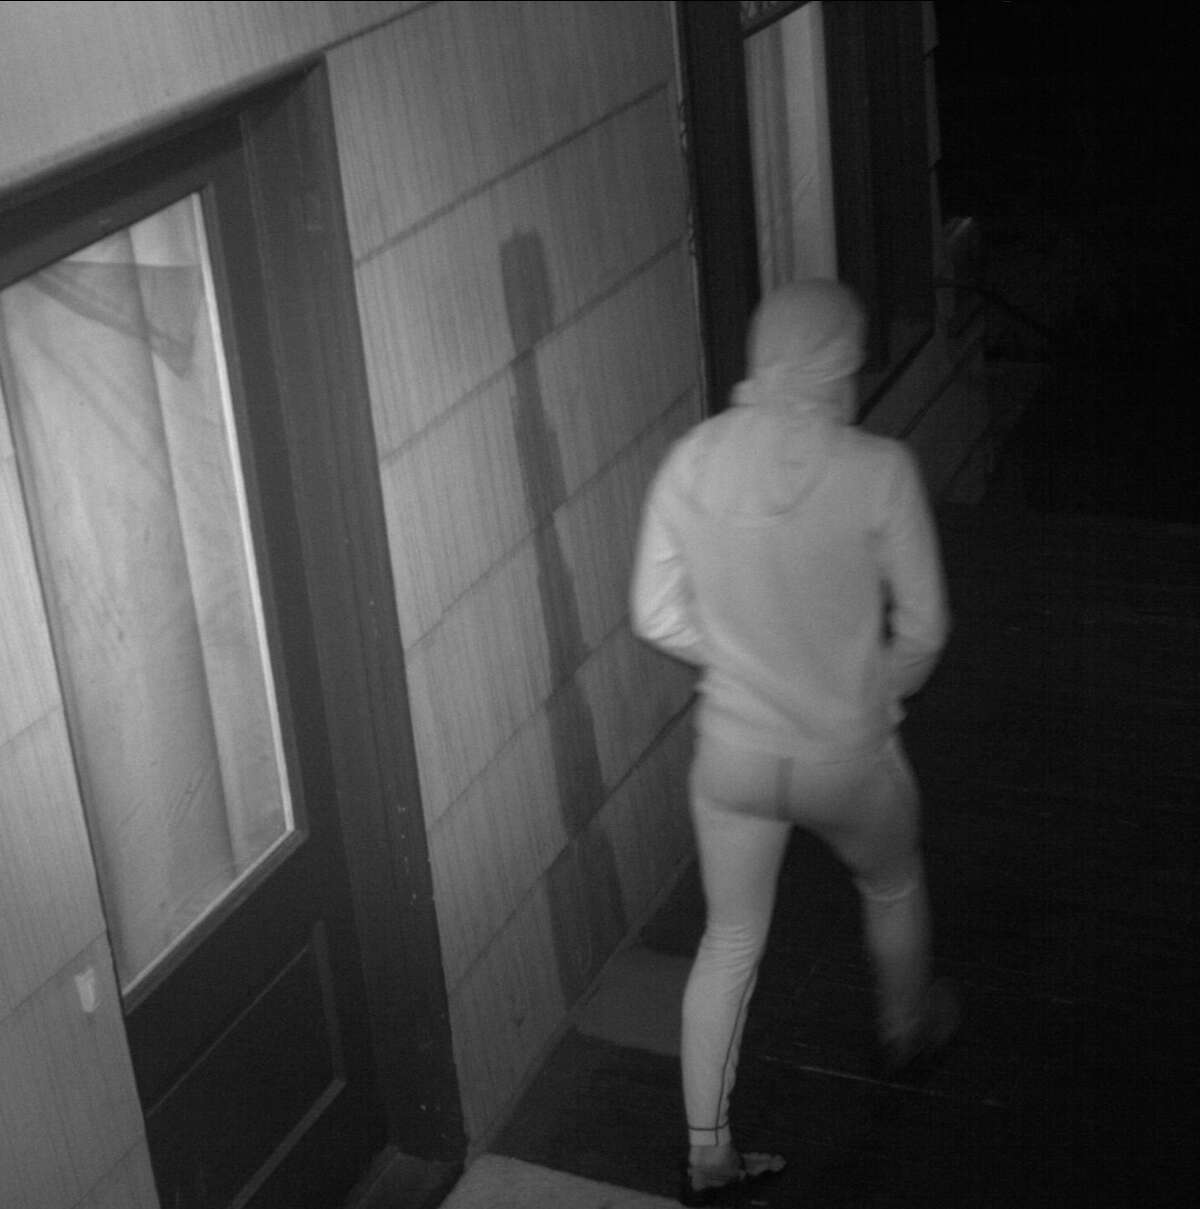 Seattle police seek this man, suspected of masturbating multiple times outside a University District home. He was caught on surveillance footage Feb. 7 wearing all black (which appears white in the image), including a wrap around his face and head and toe shoes.